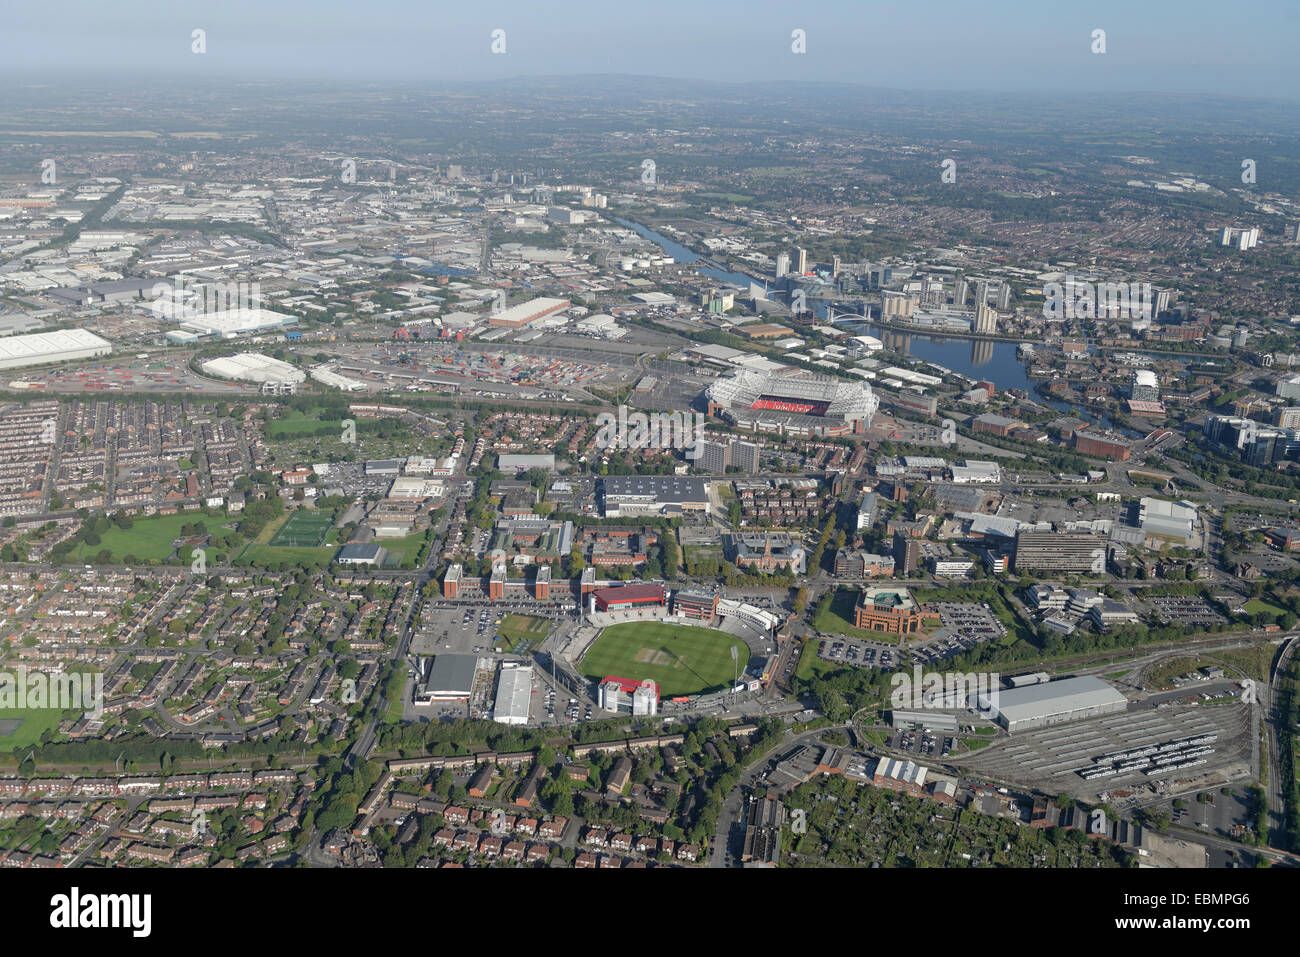 An aerial view of the Old Trafford and Trafford Park areas of Manchester showing both the football and cricket grounds. Stock Photo